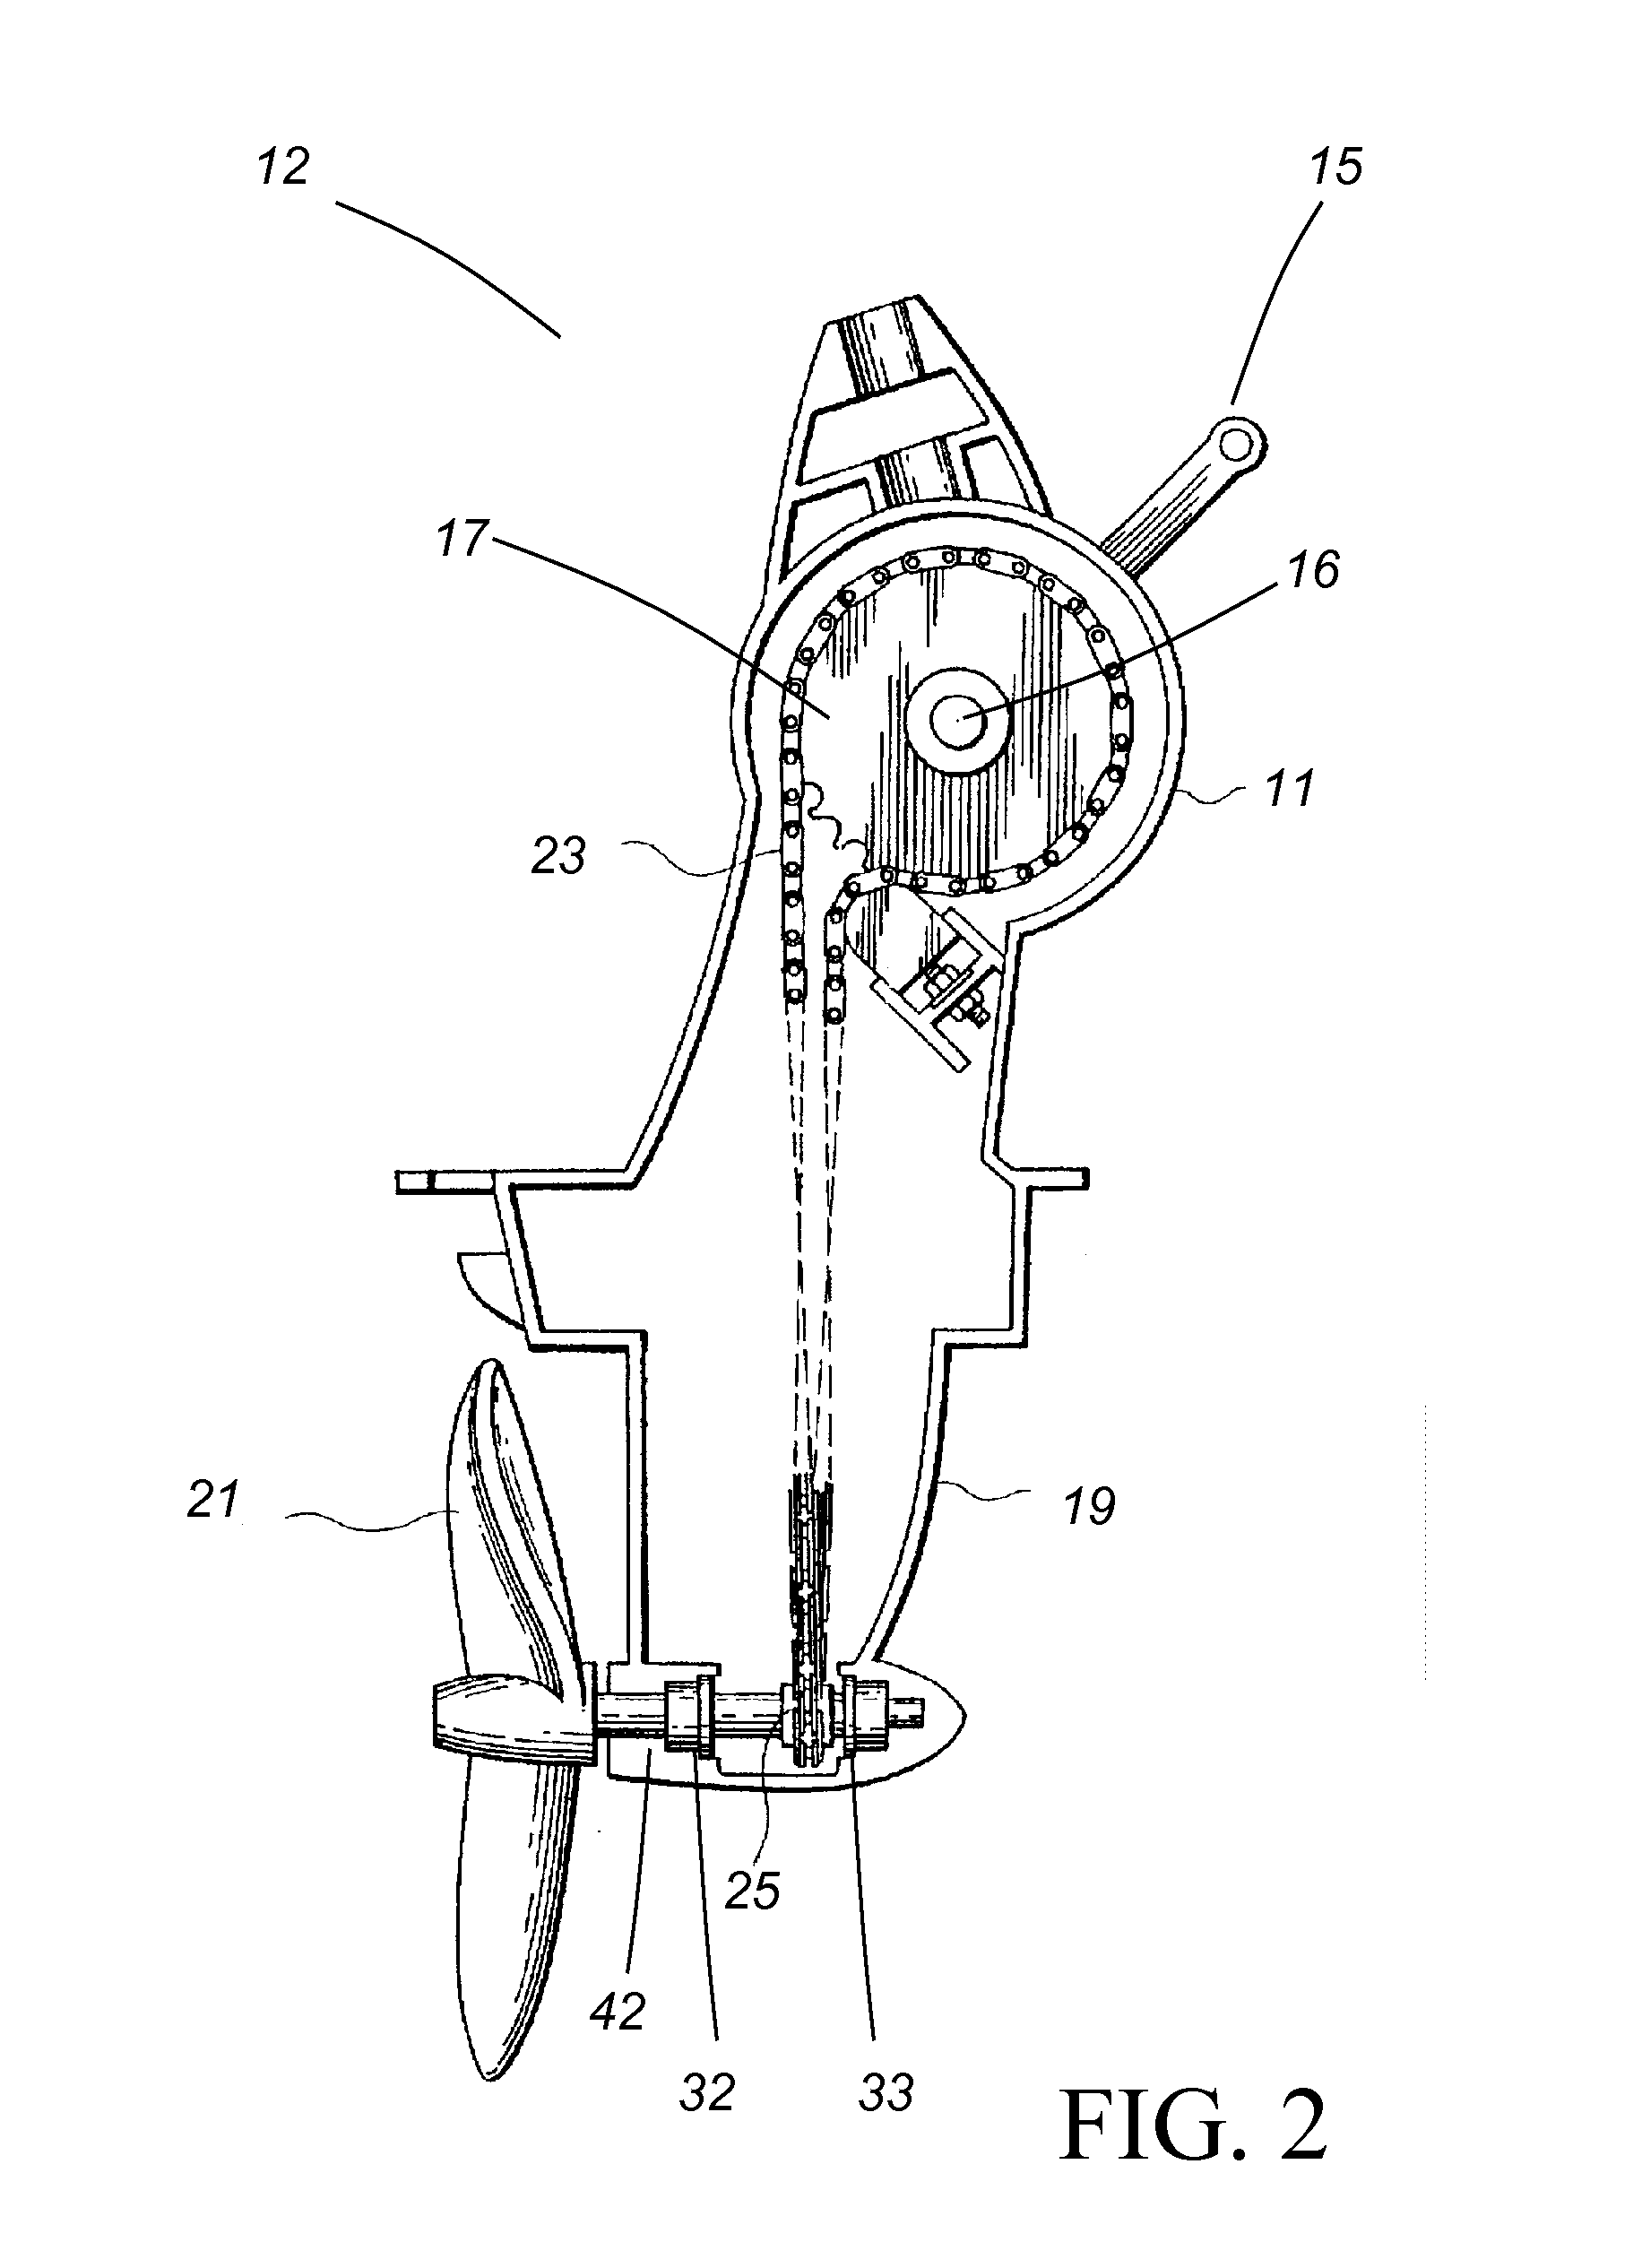 Separated Electric Motor Assisted Propulsion for Human-Powered Watercraft